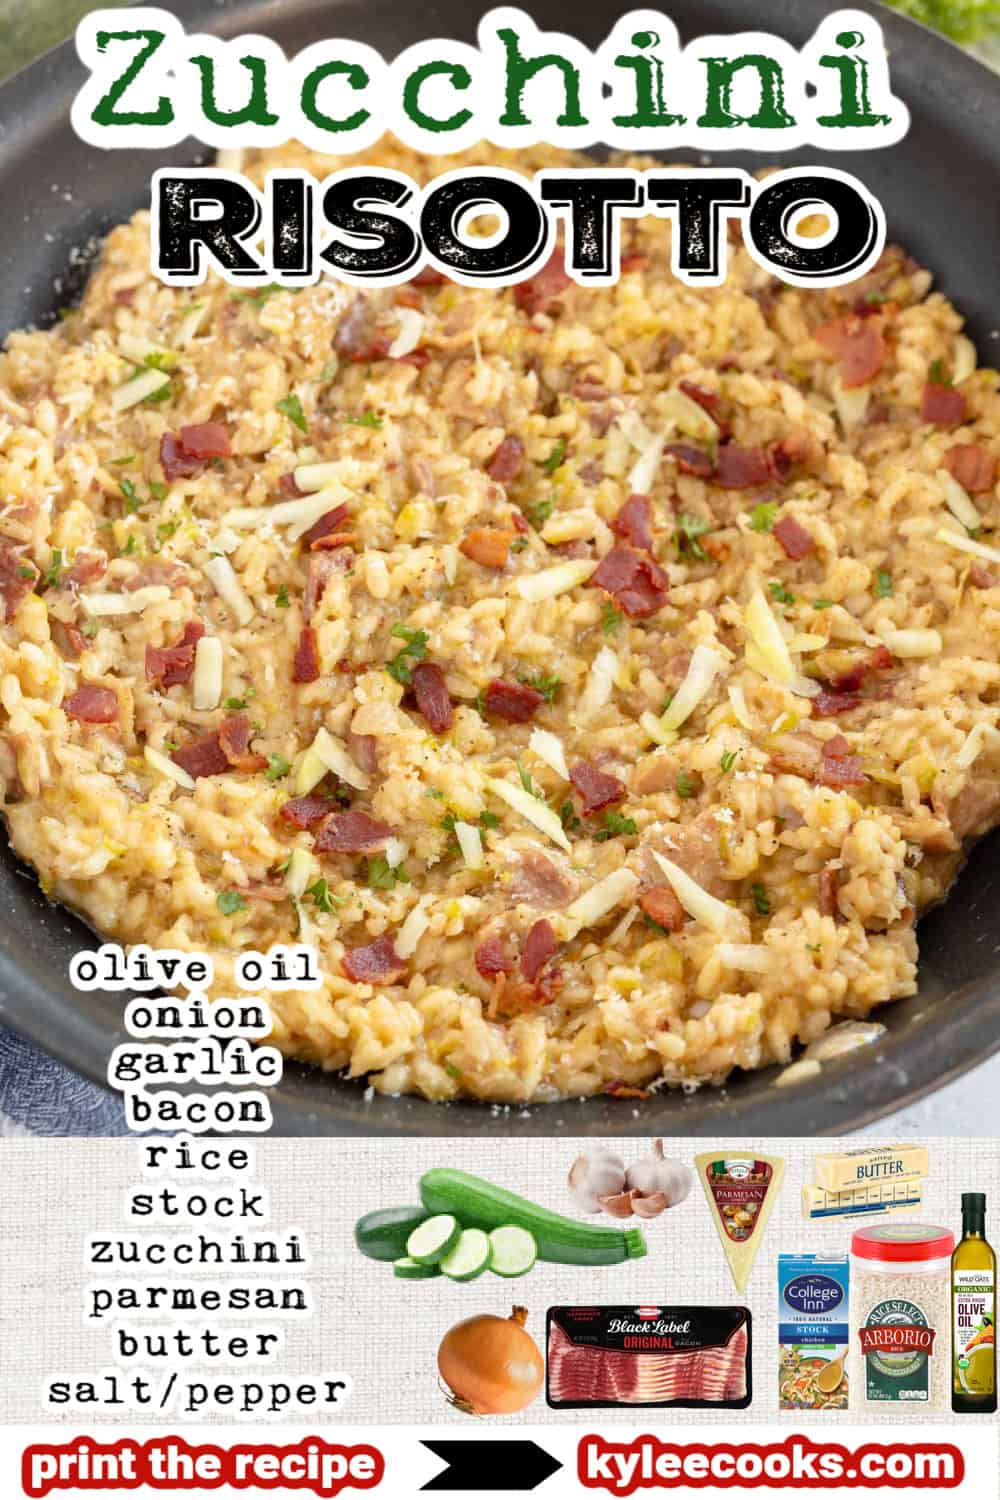 zucchini risotto with recipe name overlaid in text.